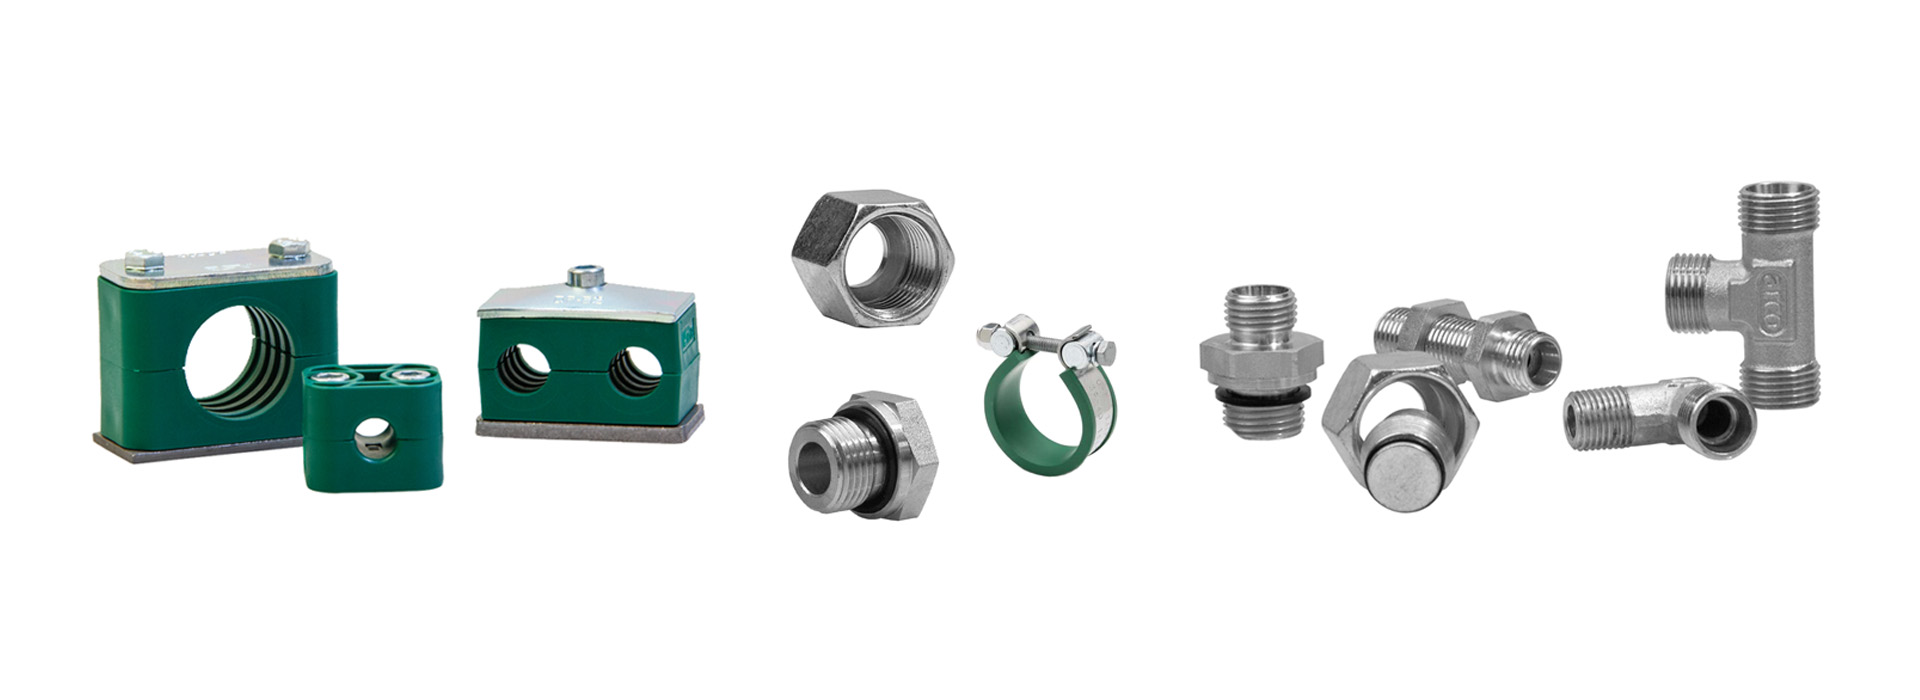 Different screw fittings